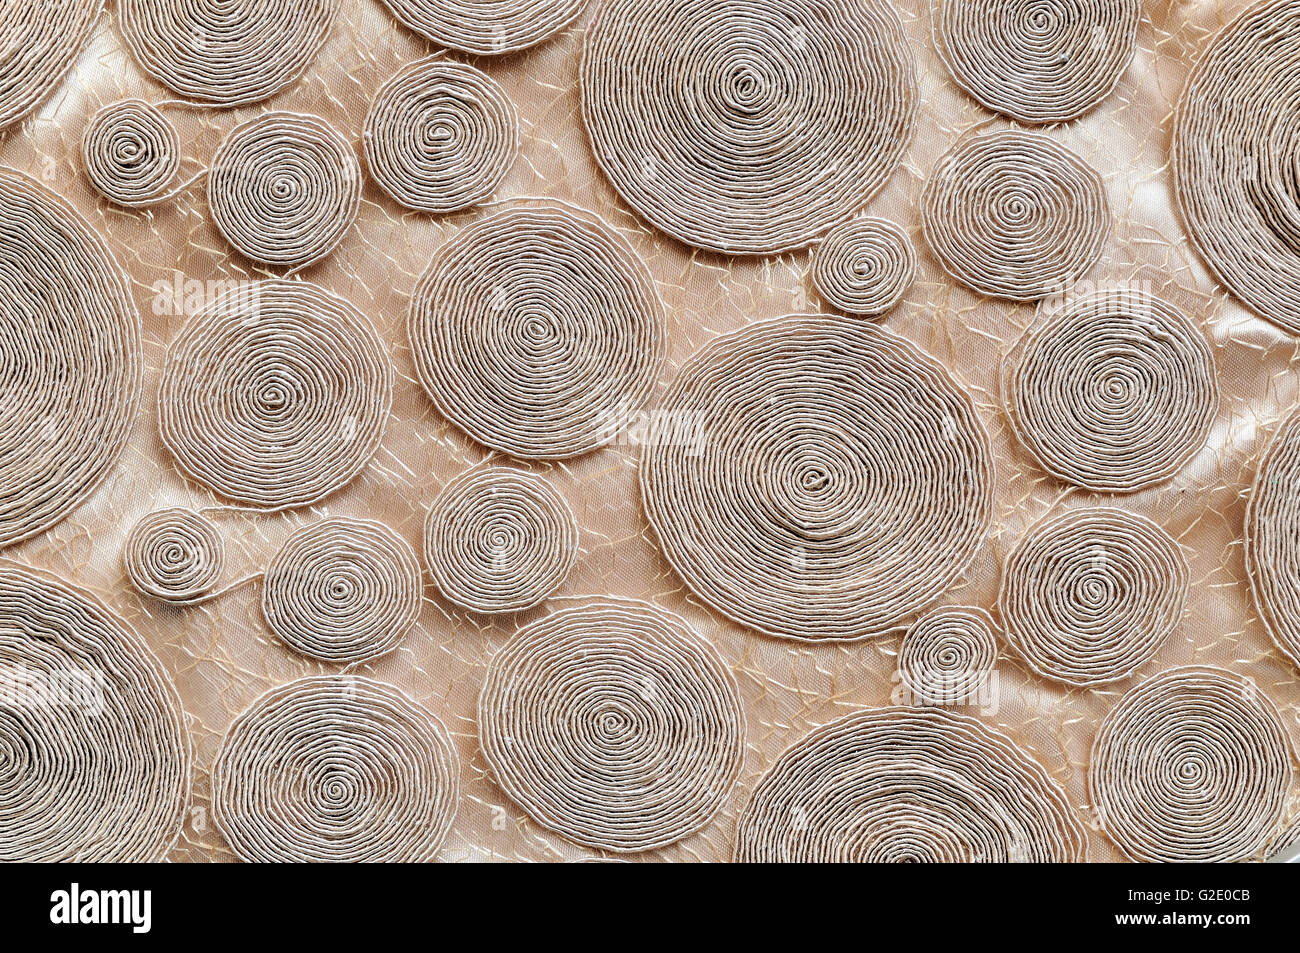 Rope circles background on brown cloth Stock Photo